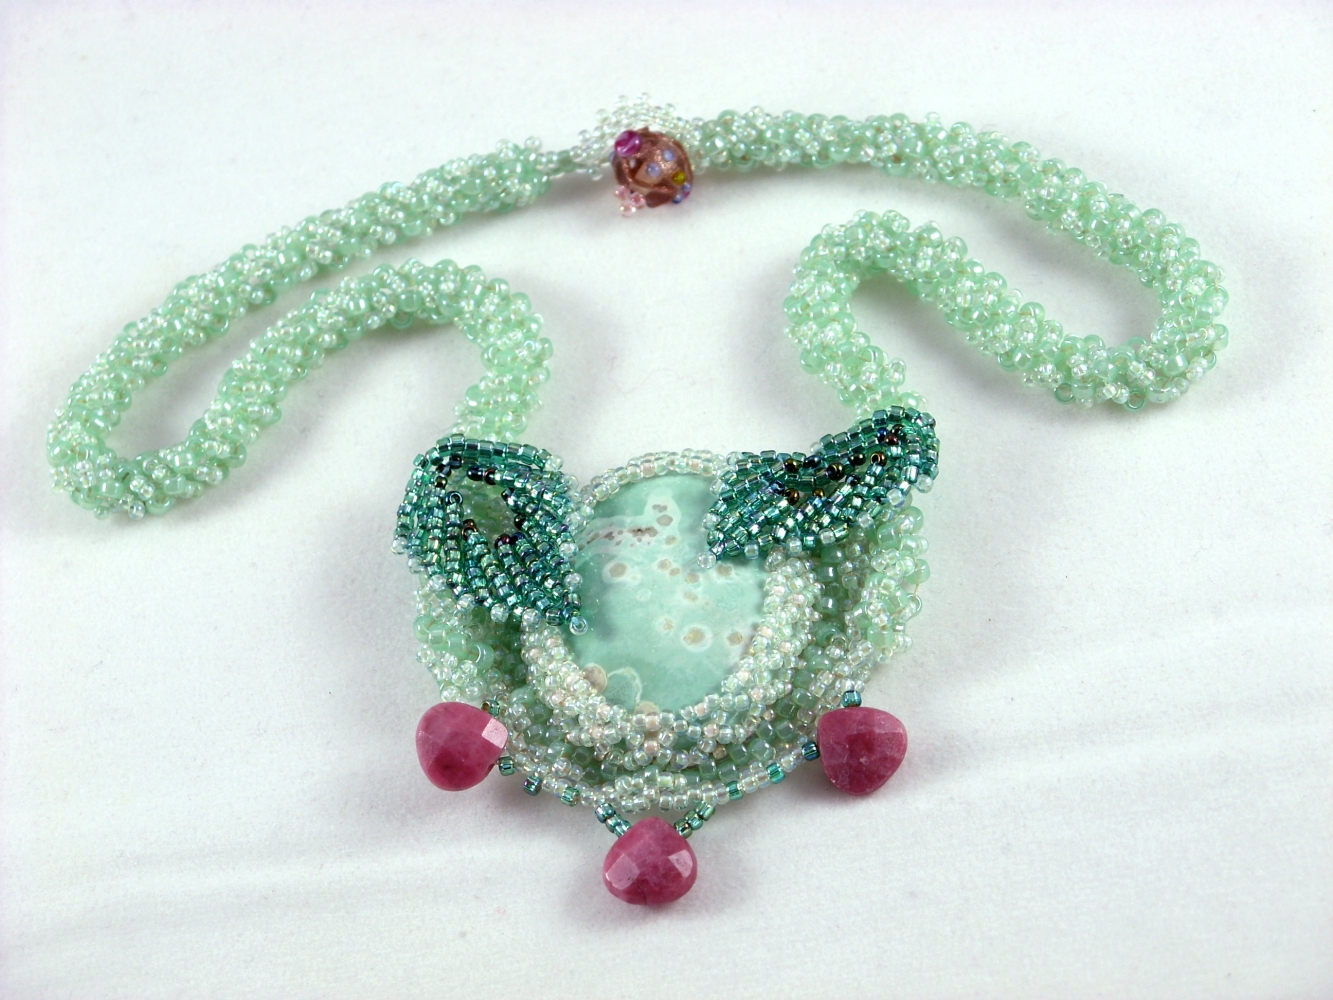 bead woven necklace in sea green bead weaving with polished stone cabochon  Patricia C Vener